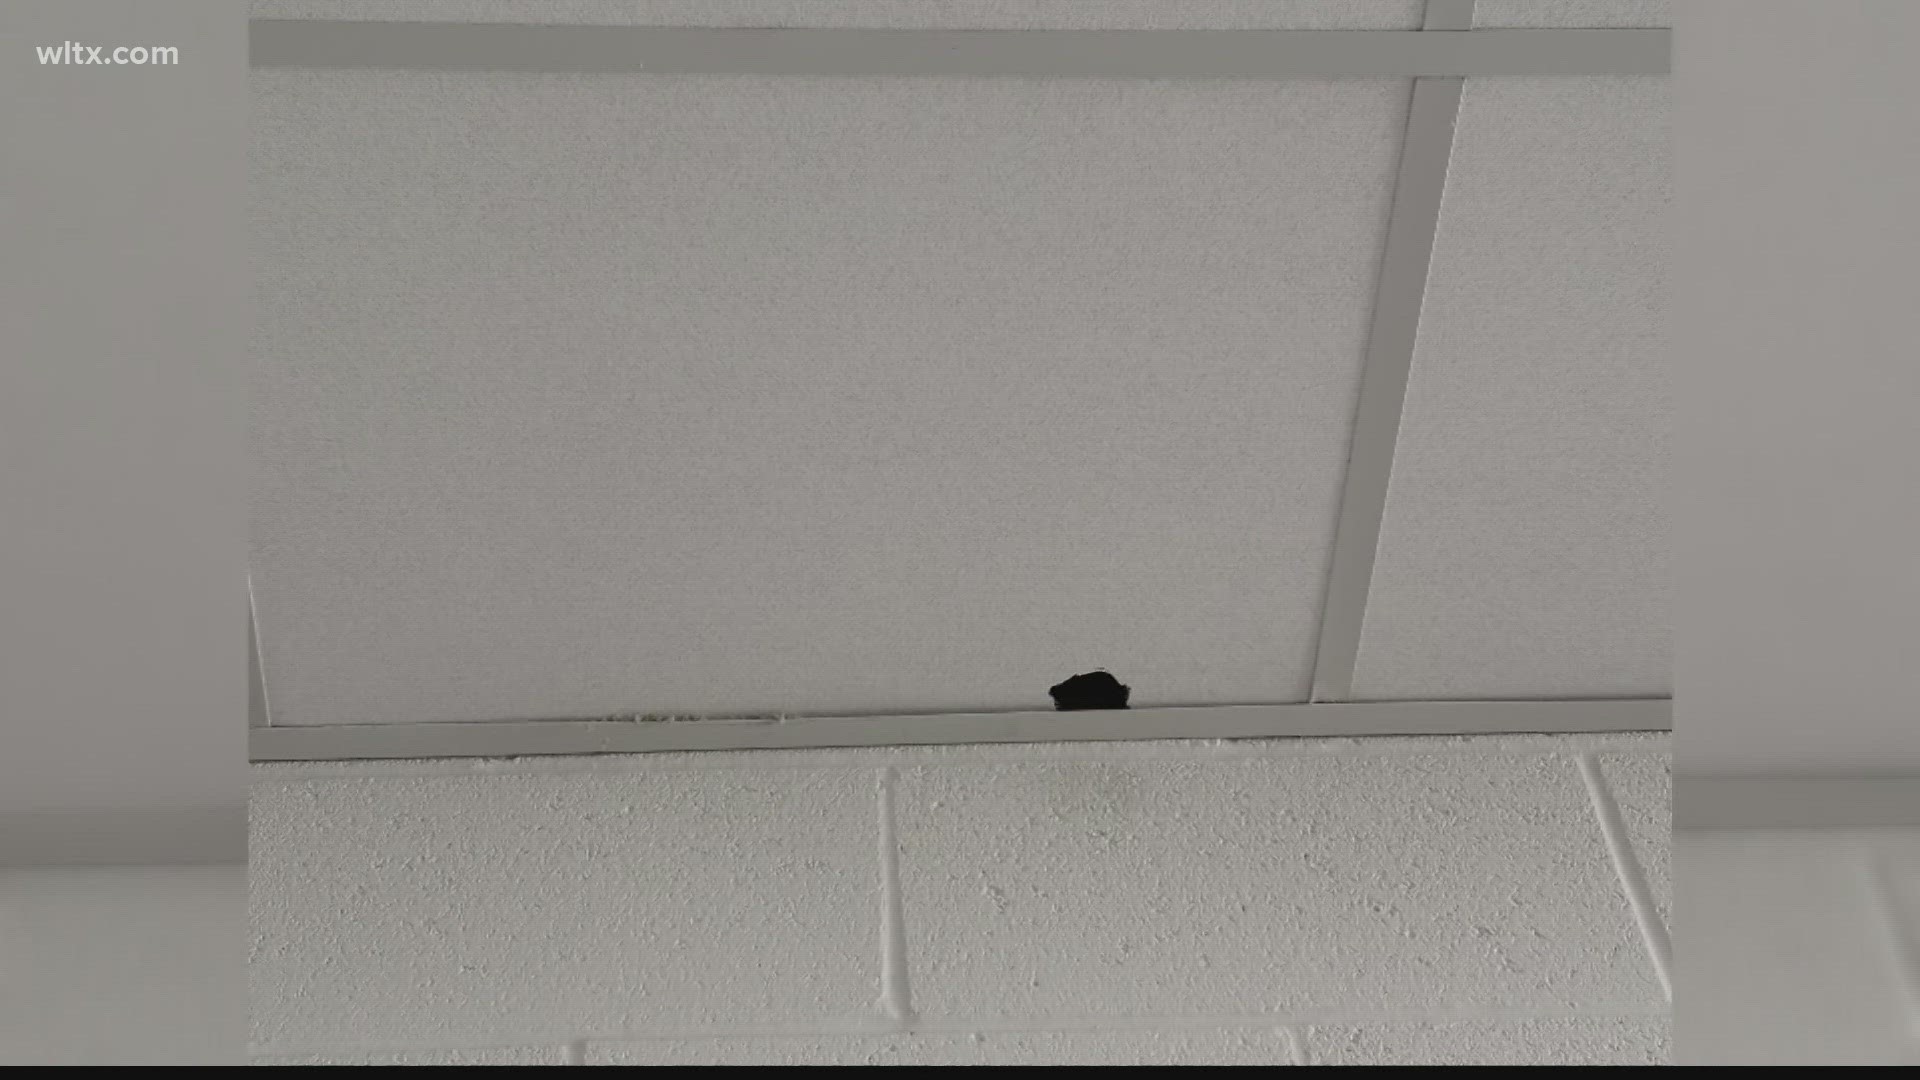 Back in February, pictures circulated on Facebook showing rat droppings in some Richland One classrooms.